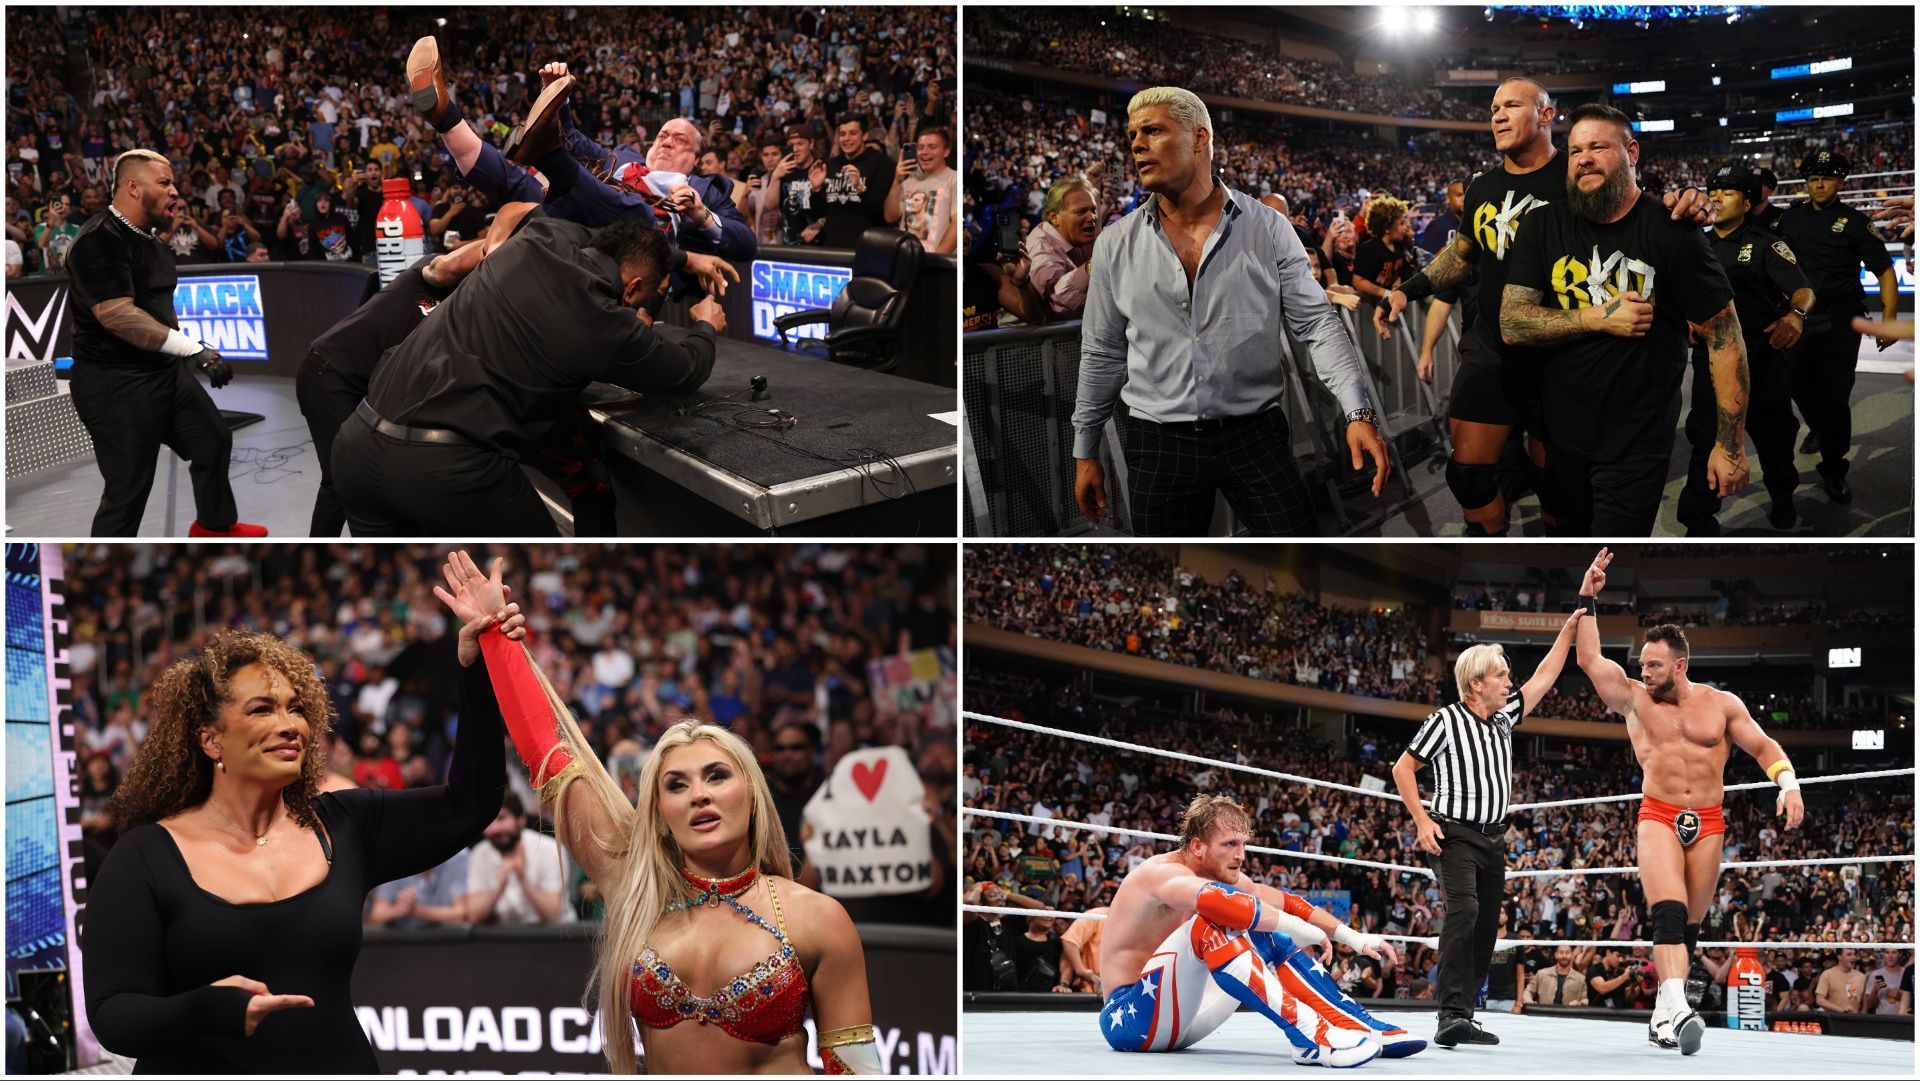 The WWE Superstars in action on SmackDown from Madison Square Garden